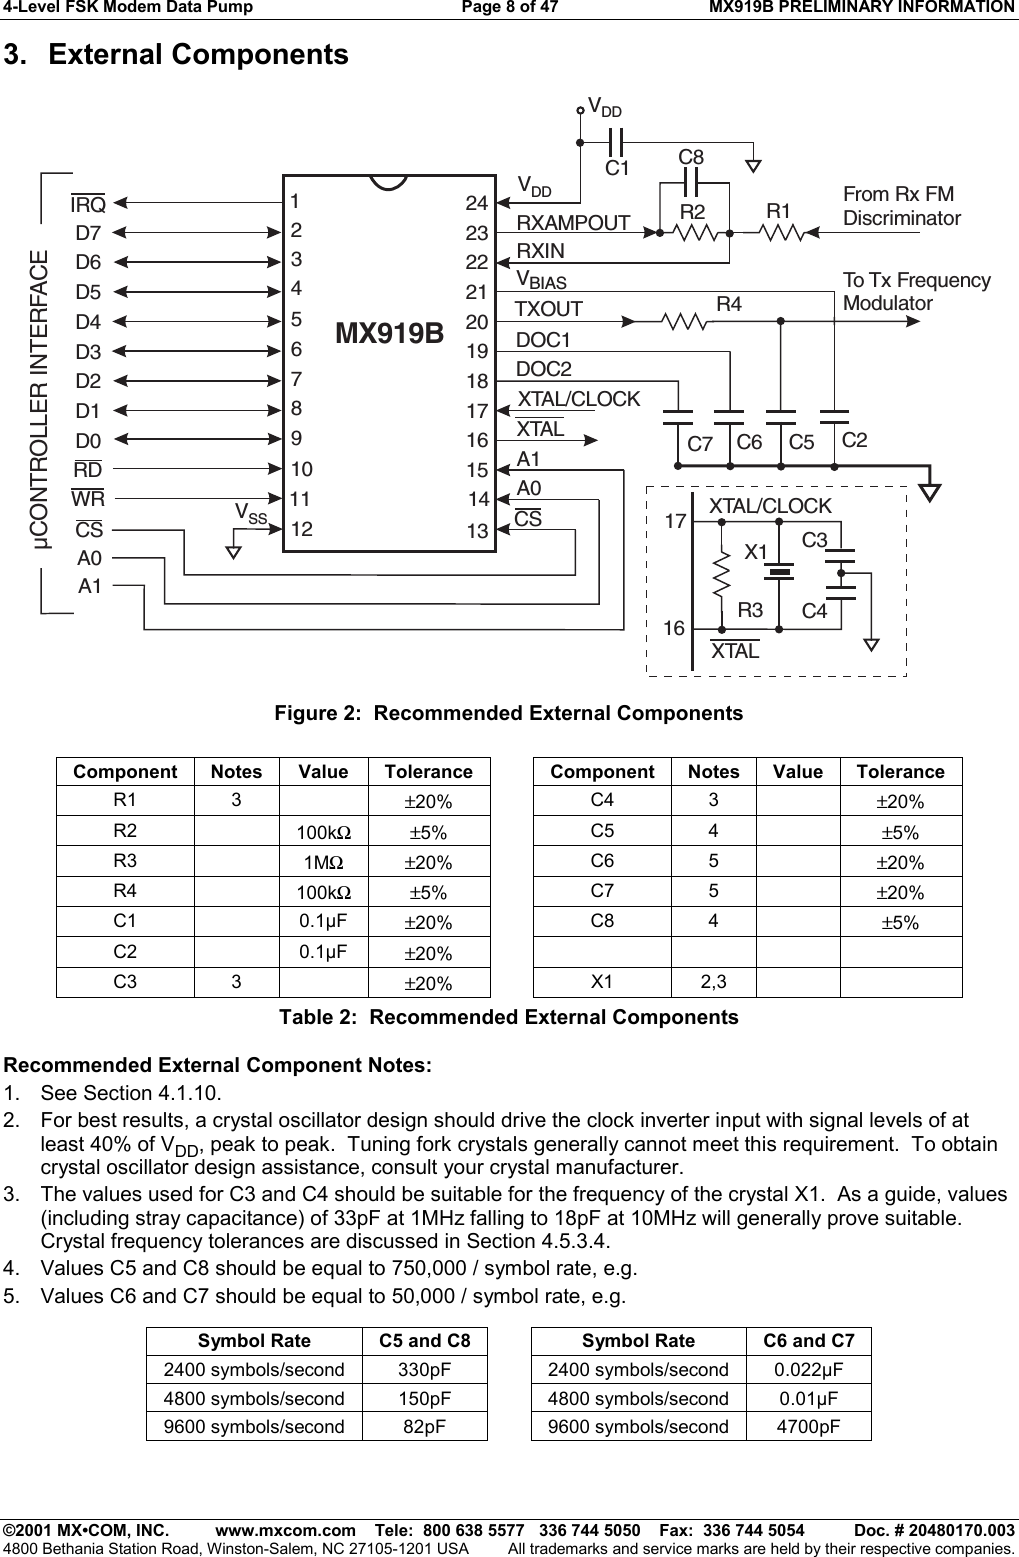 4-Level FSK Modem Data Pump  Page 8 of 47  MX919B PRELIMINARY INFORMATION   ©2001 MX•COM, INC.  www.mxcom.com    Tele:  800 638 5577   336 744 5050    Fax:  336 744 5054  Doc. # 20480170.003 4800 Bethania Station Road, Winston-Salem, NC 27105-1201 USA  All trademarks and service marks are held by their respective companies. 3. External Components DOC1DOC2VDDVDDVSSVBIASRXINFrom Rx FMDiscriminatorTo Tx FrequencyModulatorRXAMPOUT R2R4R1µCONTROLLER INTERFACEMX919BTXOUTC7 C5C3C4R3X1C6C8C2D7D6D5D4D3D2D1D0A0A1A1A0XTAL/CLOCKXTAL/CLOCK12345689101112 13147242322212019181717161615IRQXTALXTALRDWRCS CSC1 Figure 2:  Recommended External Components  Component Notes  Value  Tolerance    Component Notes Value Tolerance R1 3  ±20%   C4  3  ±20% R2  100kΩ ±5%   C5  4   ±5% R3  1MΩ ±20%   C6  5  ±20% R4  100kΩ ±5%   C7  5  ±20% C1  0.1µF ±20%   C8  4   ±5% C2  0.1µF ±20%         C3 3  ±20%   X1  2,3    Table 2:  Recommended External Components Recommended External Component Notes: 1. See Section 4.1.10. 2.  For best results, a crystal oscillator design should drive the clock inverter input with signal levels of at least 40% of VDD, peak to peak.  Tuning fork crystals generally cannot meet this requirement.  To obtain crystal oscillator design assistance, consult your crystal manufacturer. 3.  The values used for C3 and C4 should be suitable for the frequency of the crystal X1.  As a guide, values (including stray capacitance) of 33pF at 1MHz falling to 18pF at 10MHz will generally prove suitable.  Crystal frequency tolerances are discussed in Section 4.5.3.4. 4.  Values C5 and C8 should be equal to 750,000 / symbol rate, e.g. 5.  Values C6 and C7 should be equal to 50,000 / symbol rate, e.g.  Symbol Rate  C5 and C8    Symbol Rate  C6 and C7 2400 symbols/second  330pF    2400 symbols/second  0.022µF 4800 symbols/second  150pF    4800 symbols/second  0.01µF 9600 symbols/second  82pF    9600 symbols/second  4700pF  